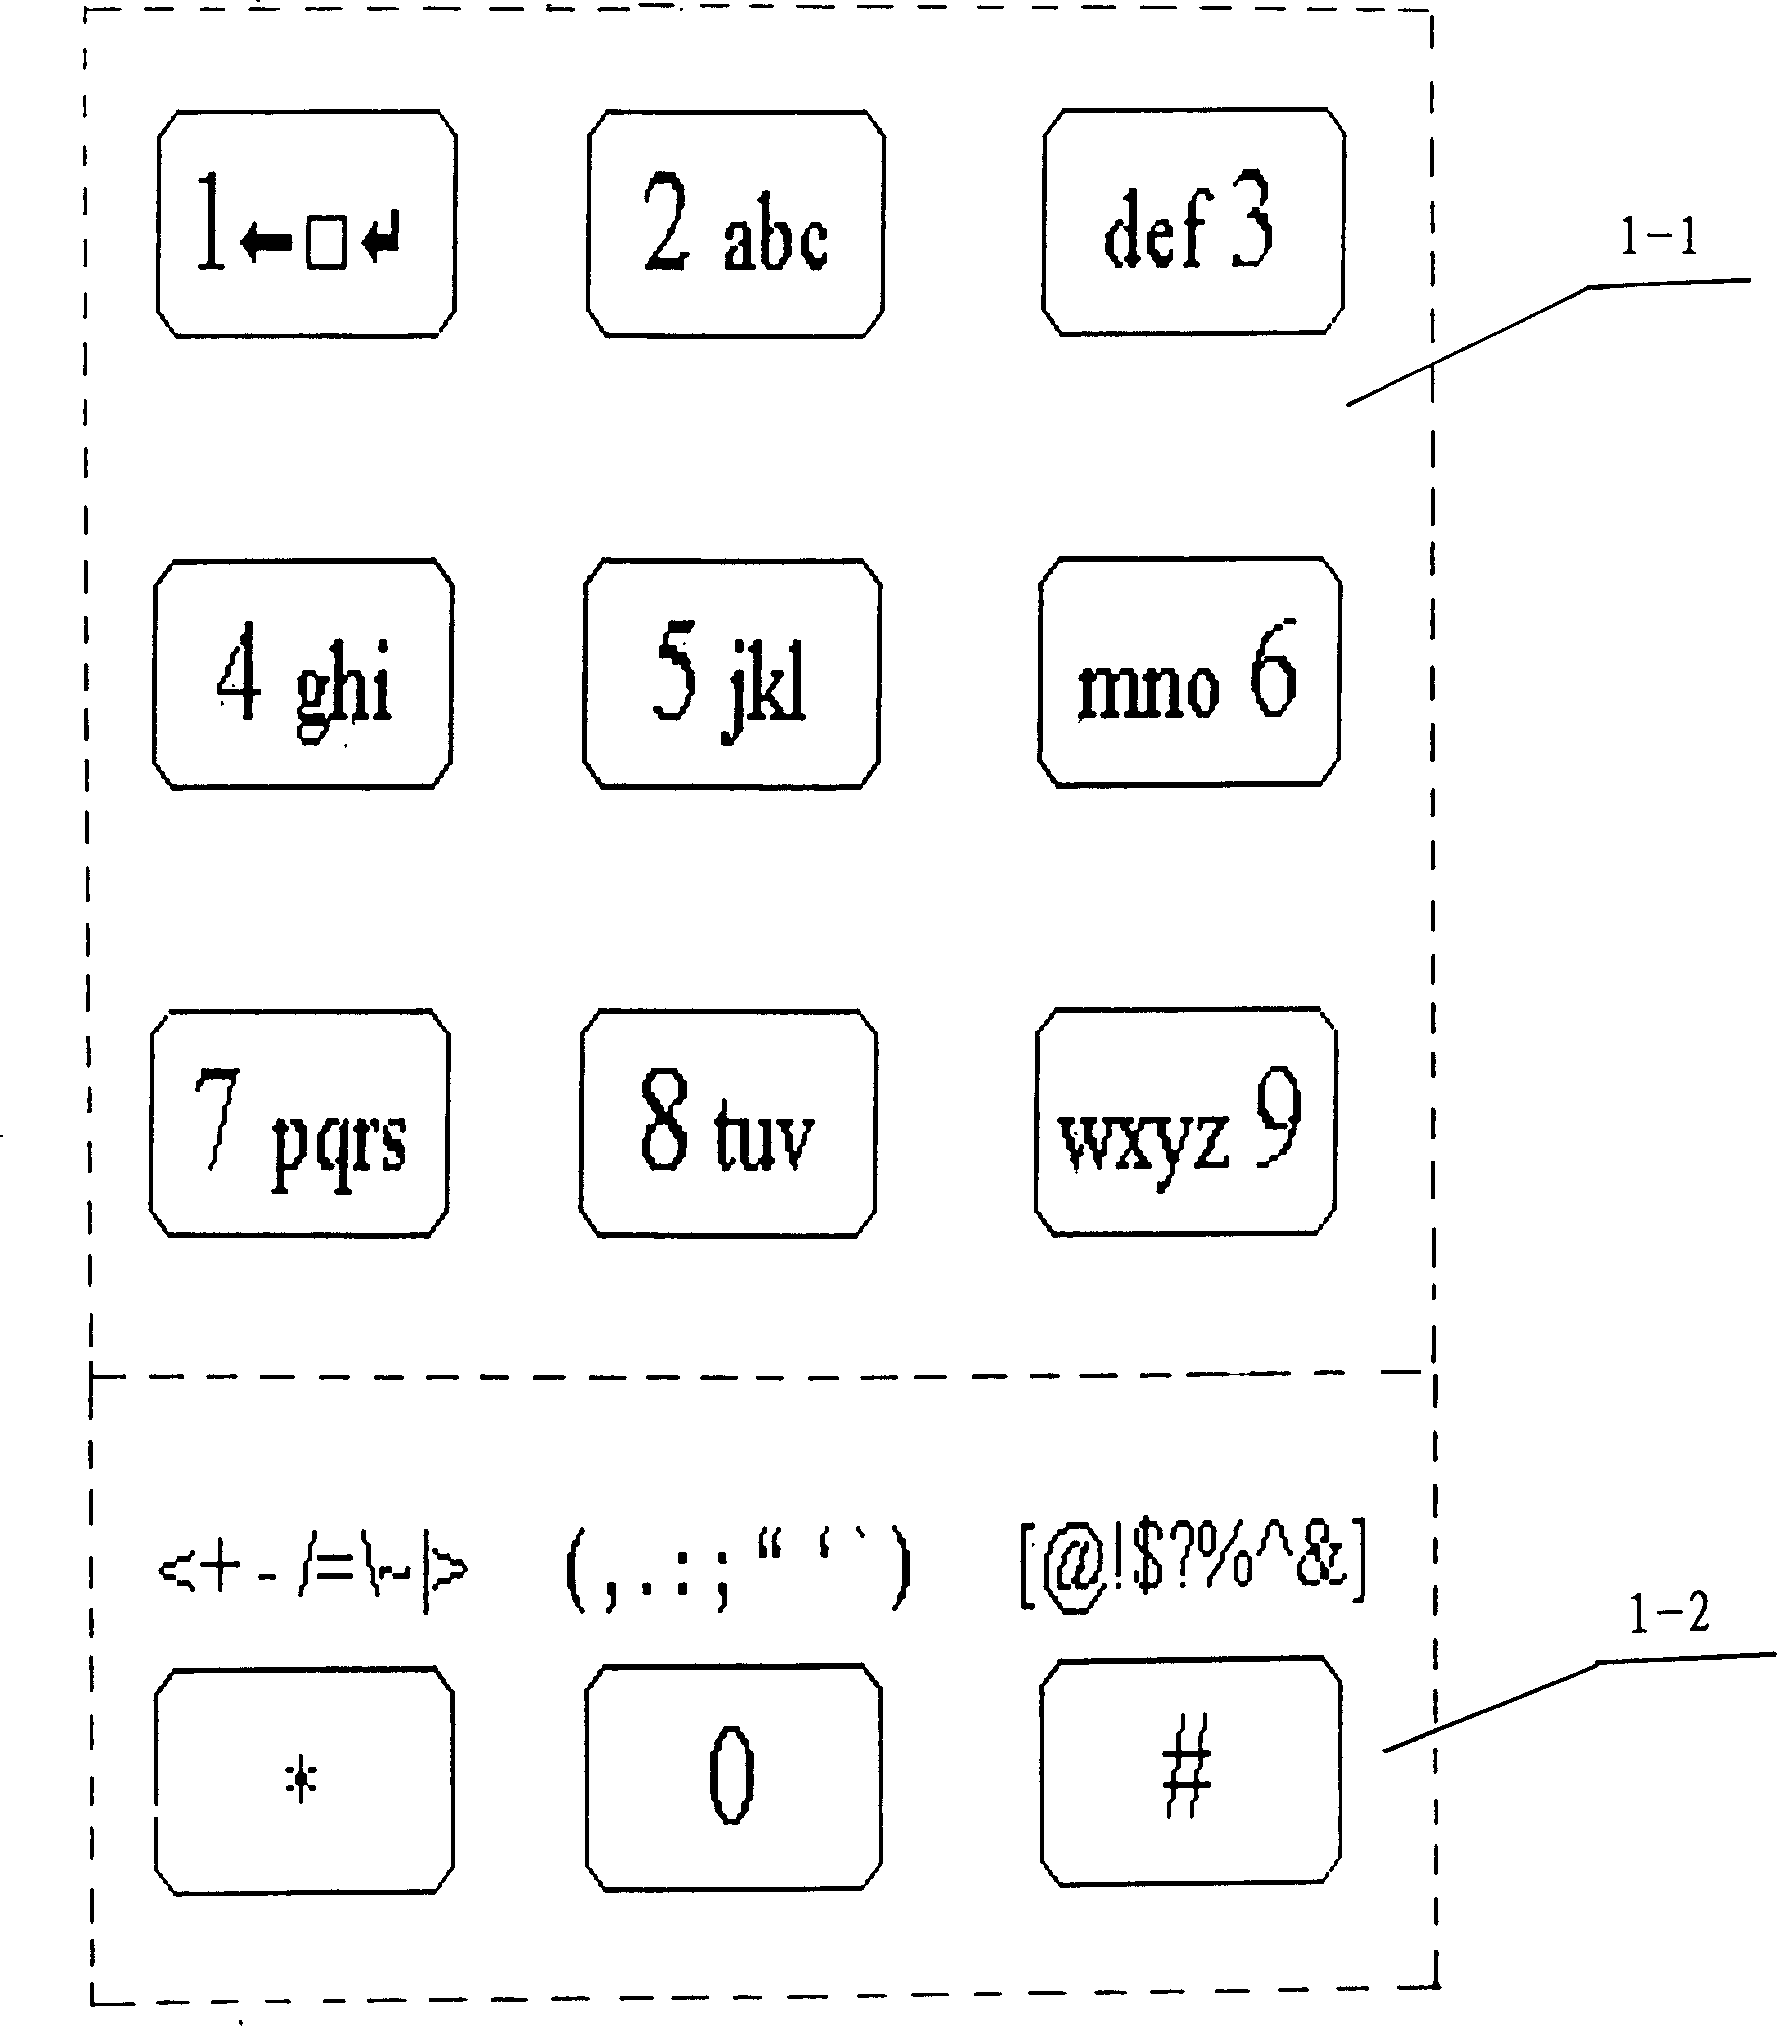 Double-key rapid character inputting method and its uses on remote controller mobile and fixed telephones